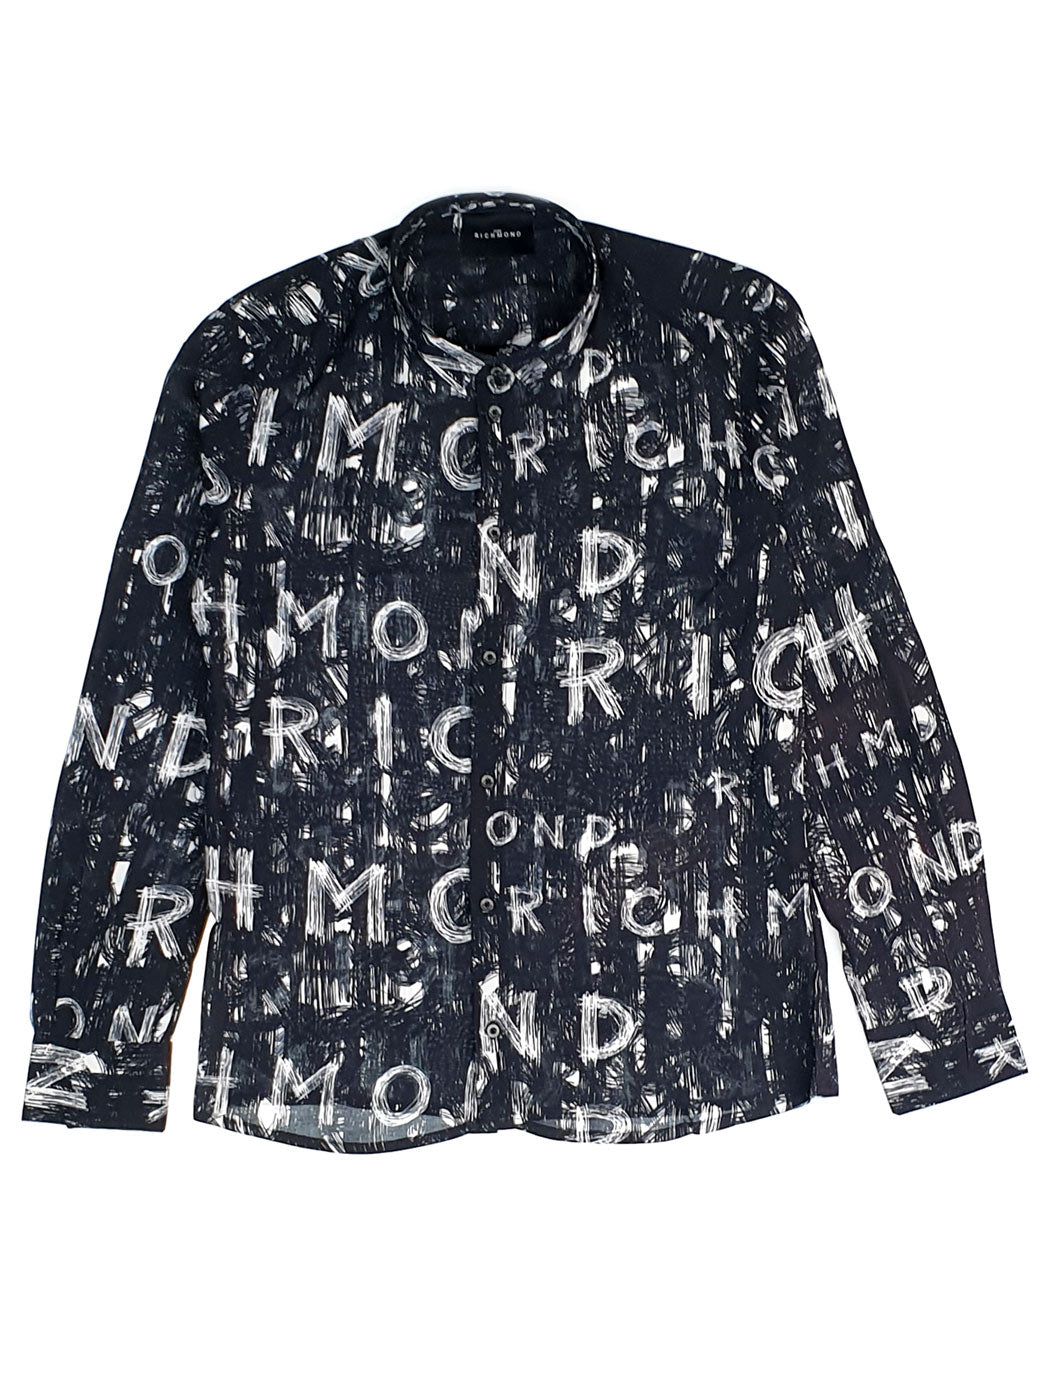 John Richmond shirt with all-over graphic print